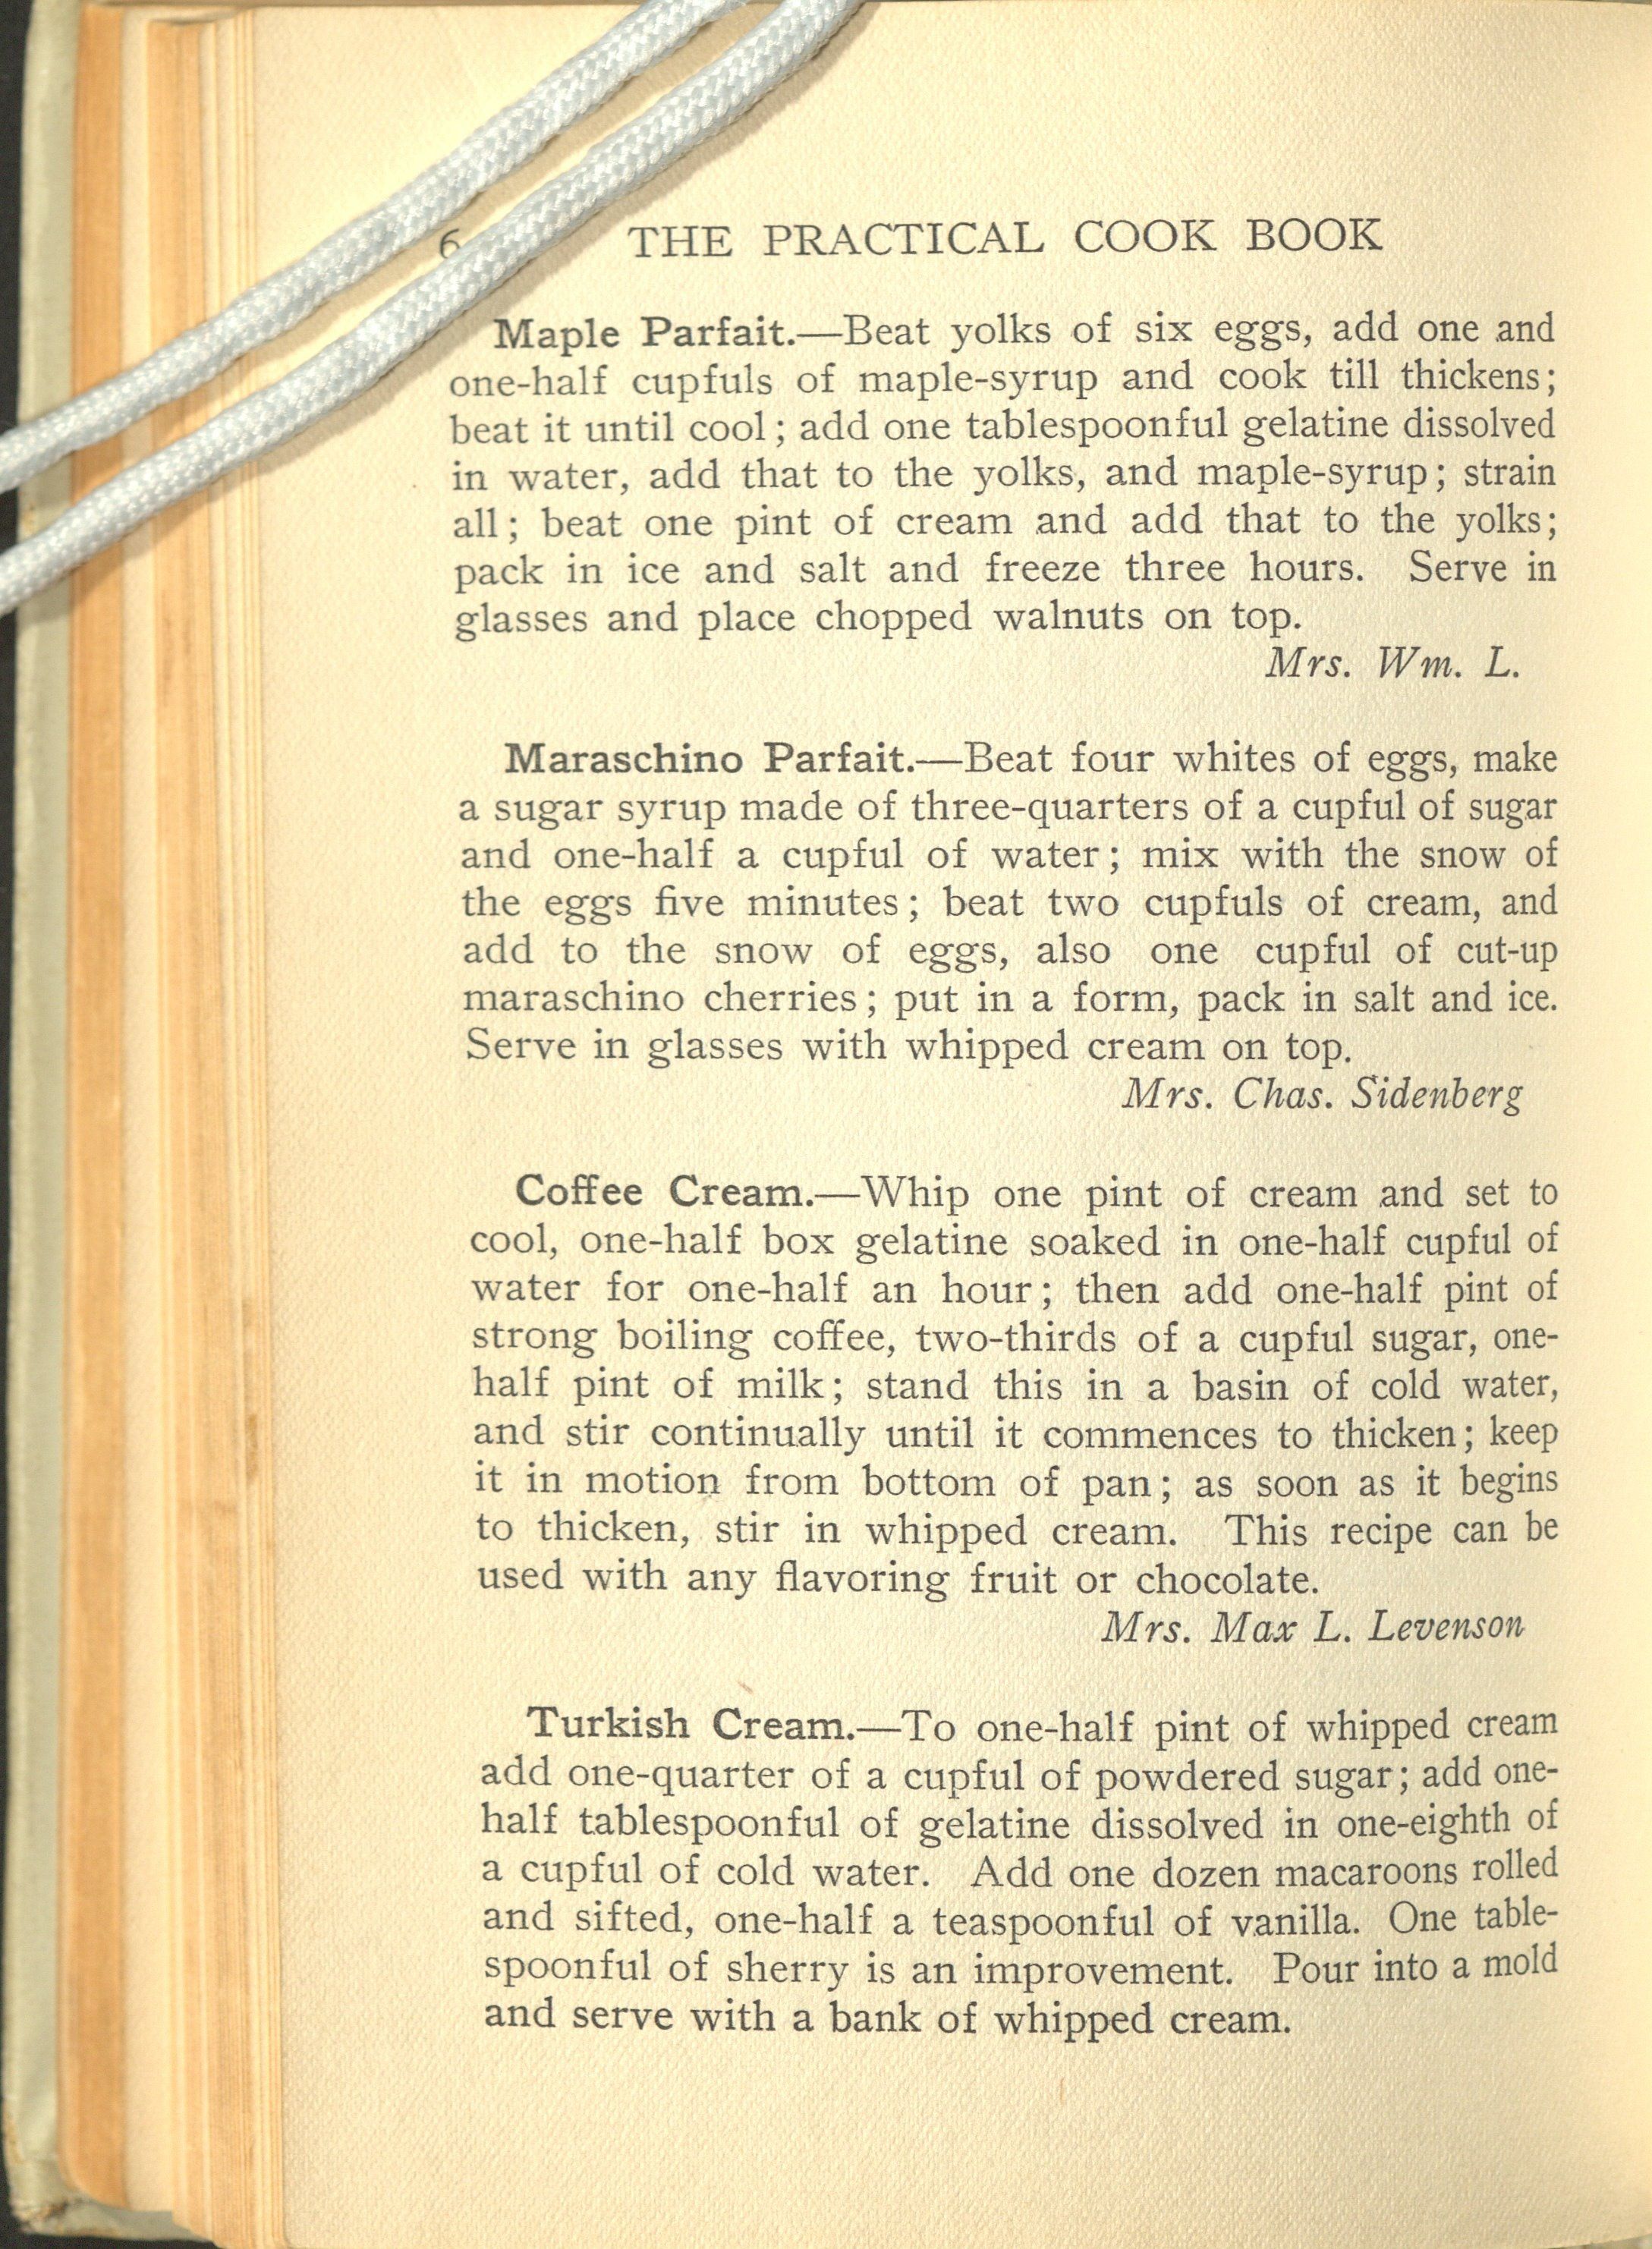 Page containing brief recipes in paragraph form for several deserts, including Maple Parfait and Turkish Cream. The latter appears to be a mix of whipped cream, gelatin, macaroons, and sherry. 